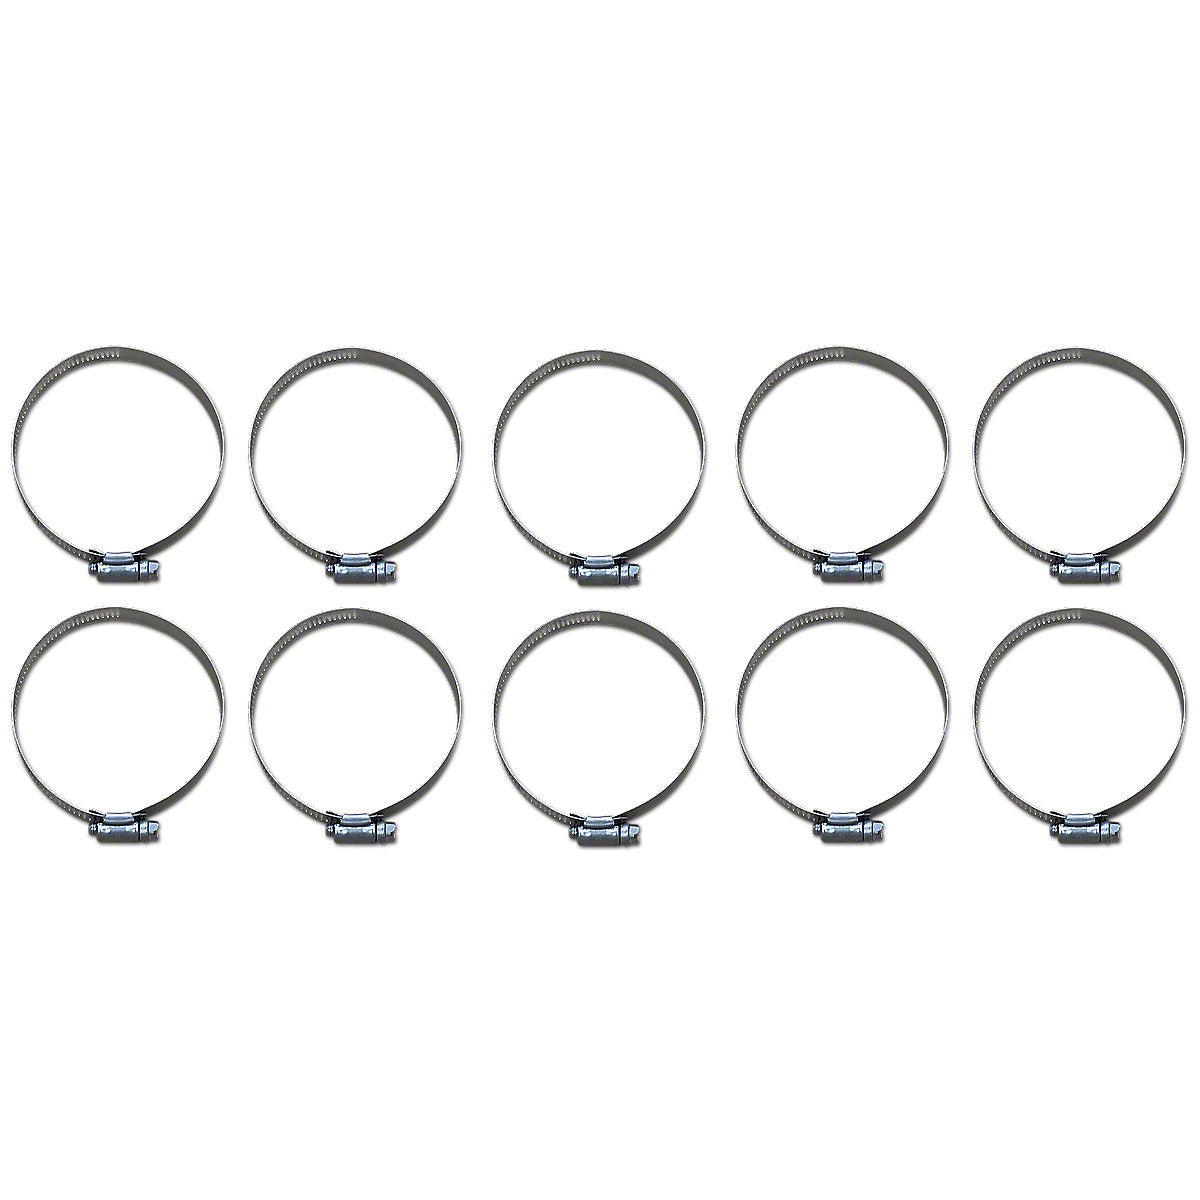 Worm Drive Hose Clamp 3-4" 10 Pack -Fits  Case  Tractor